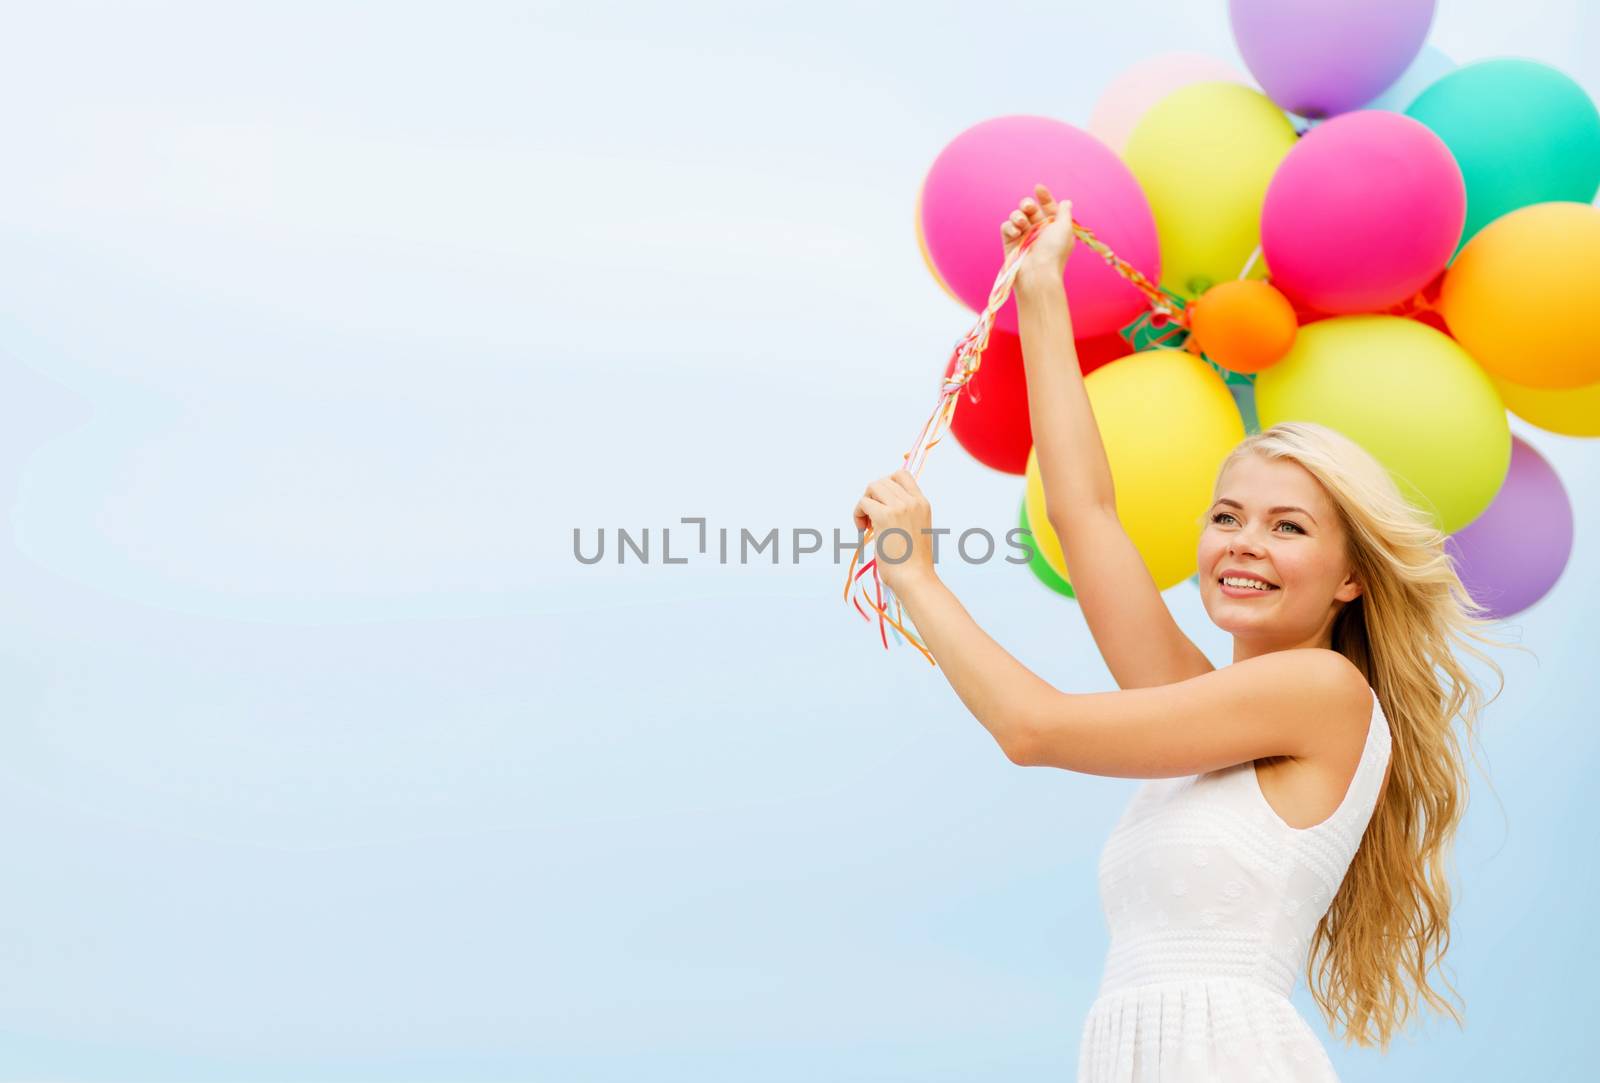 smiling woman with colorful balloons outside by dolgachov